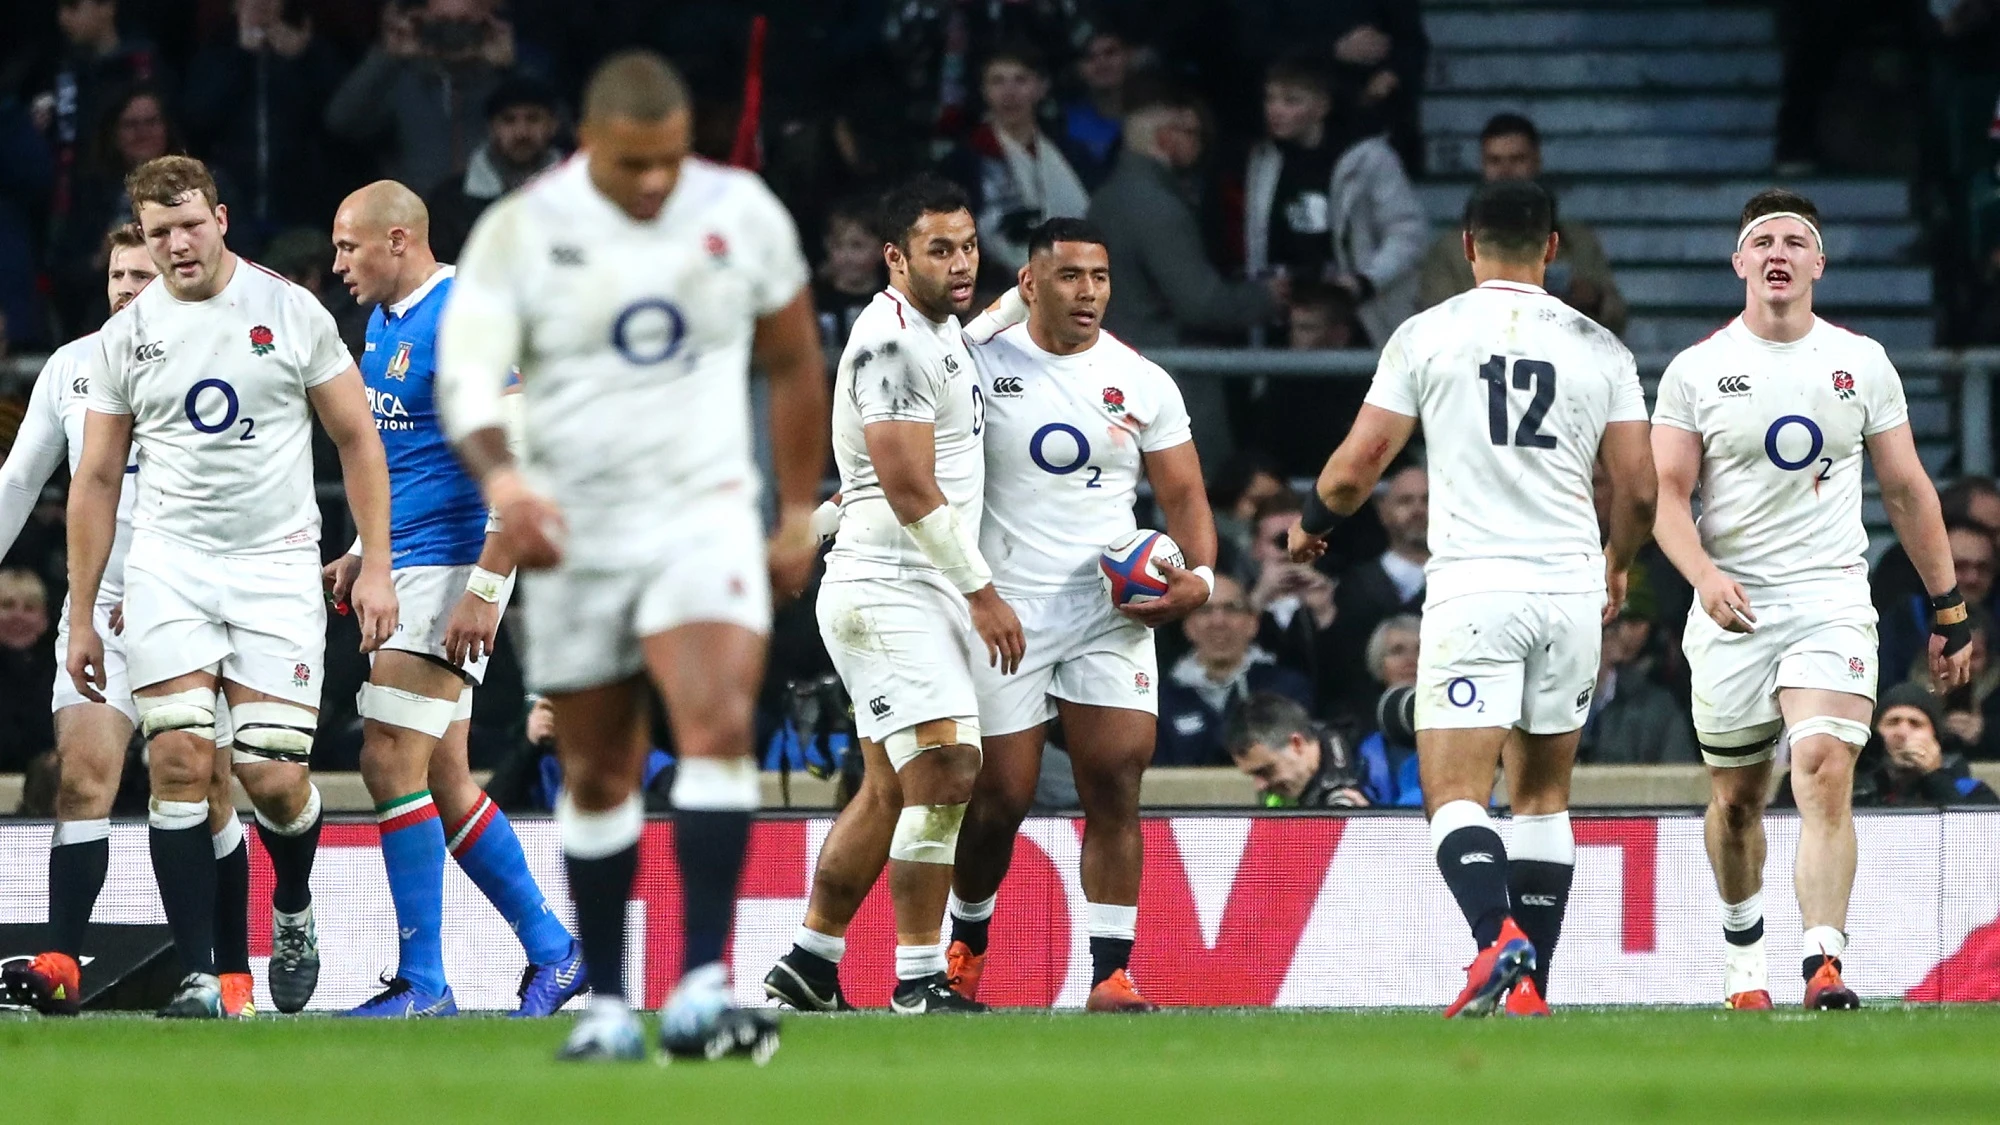 Manu Tuilagi celebrates scoring their fifth try with Billy Vunipola 9/3/2019